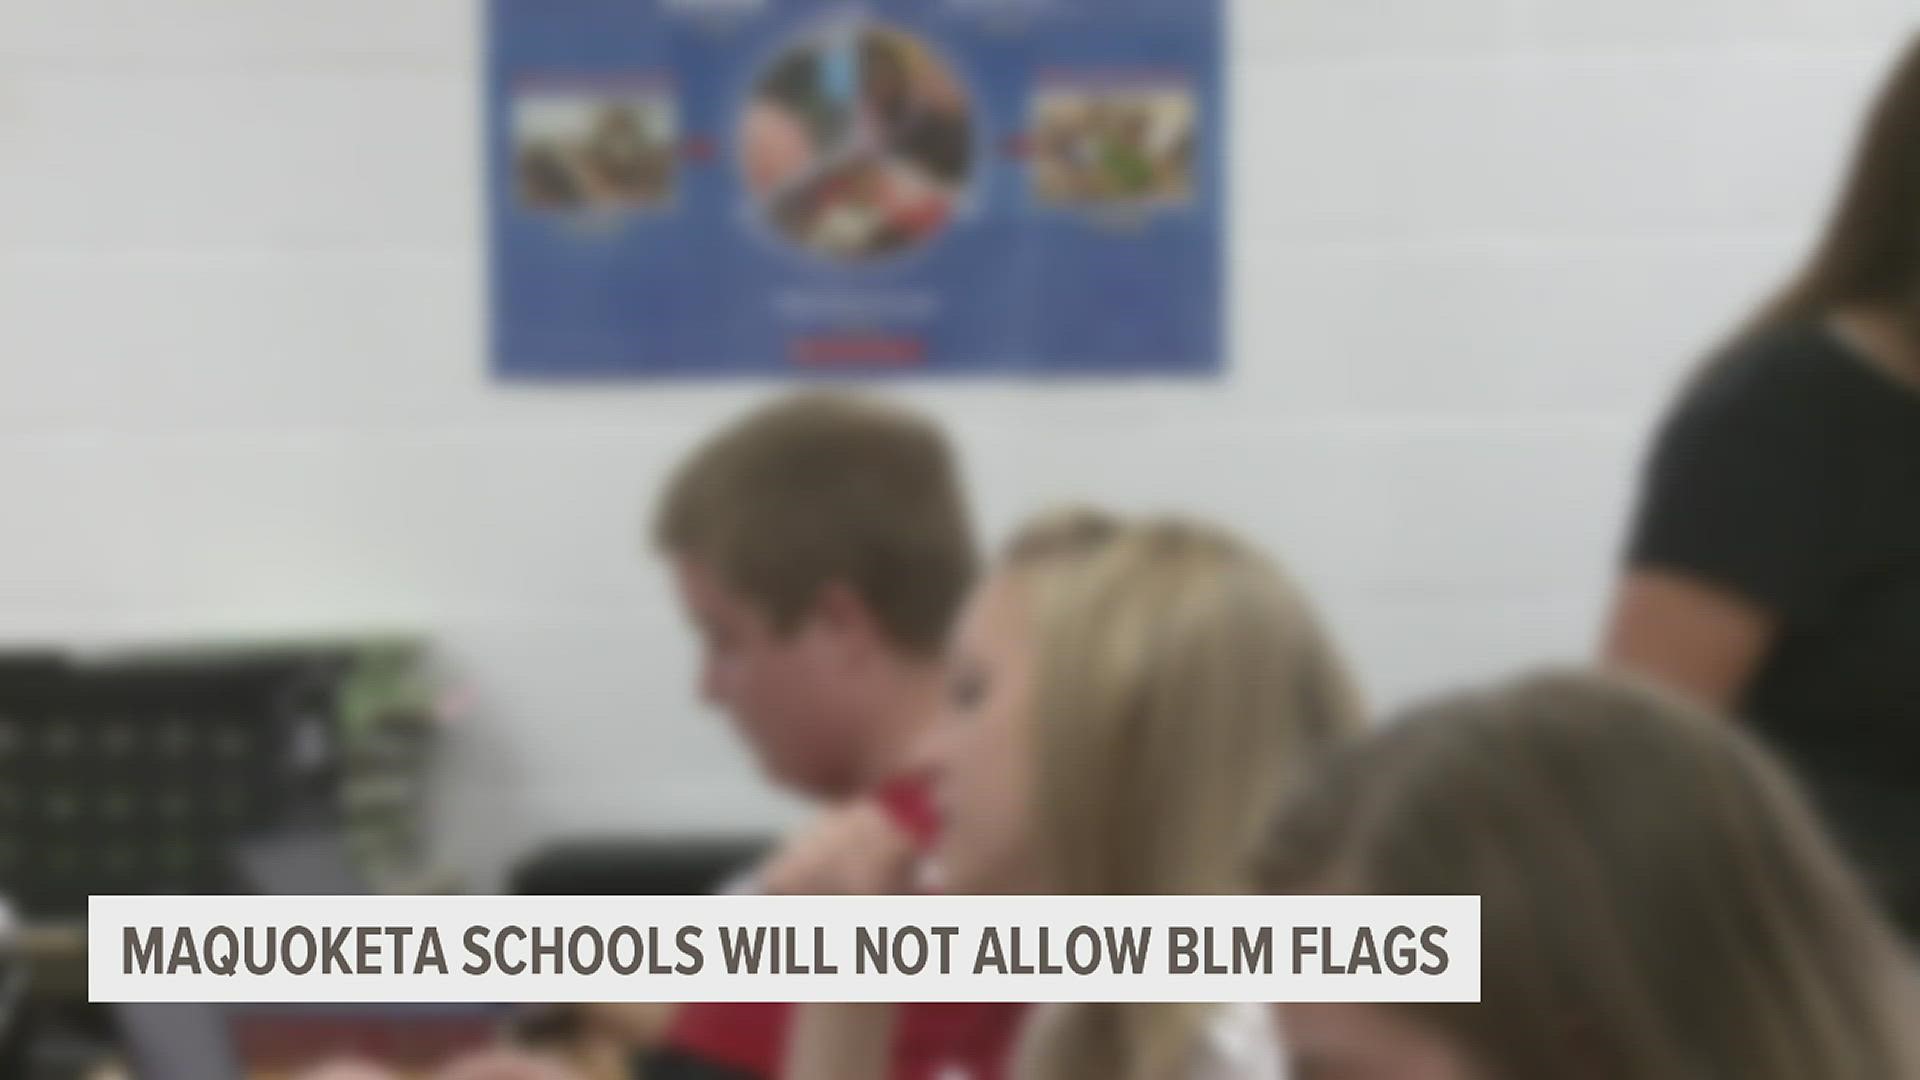 The Maquoketa School District elected to remove a Black Lives Matter flag from a MHS classroom on ground of representing political expression, despite a LGBTQ+ flag